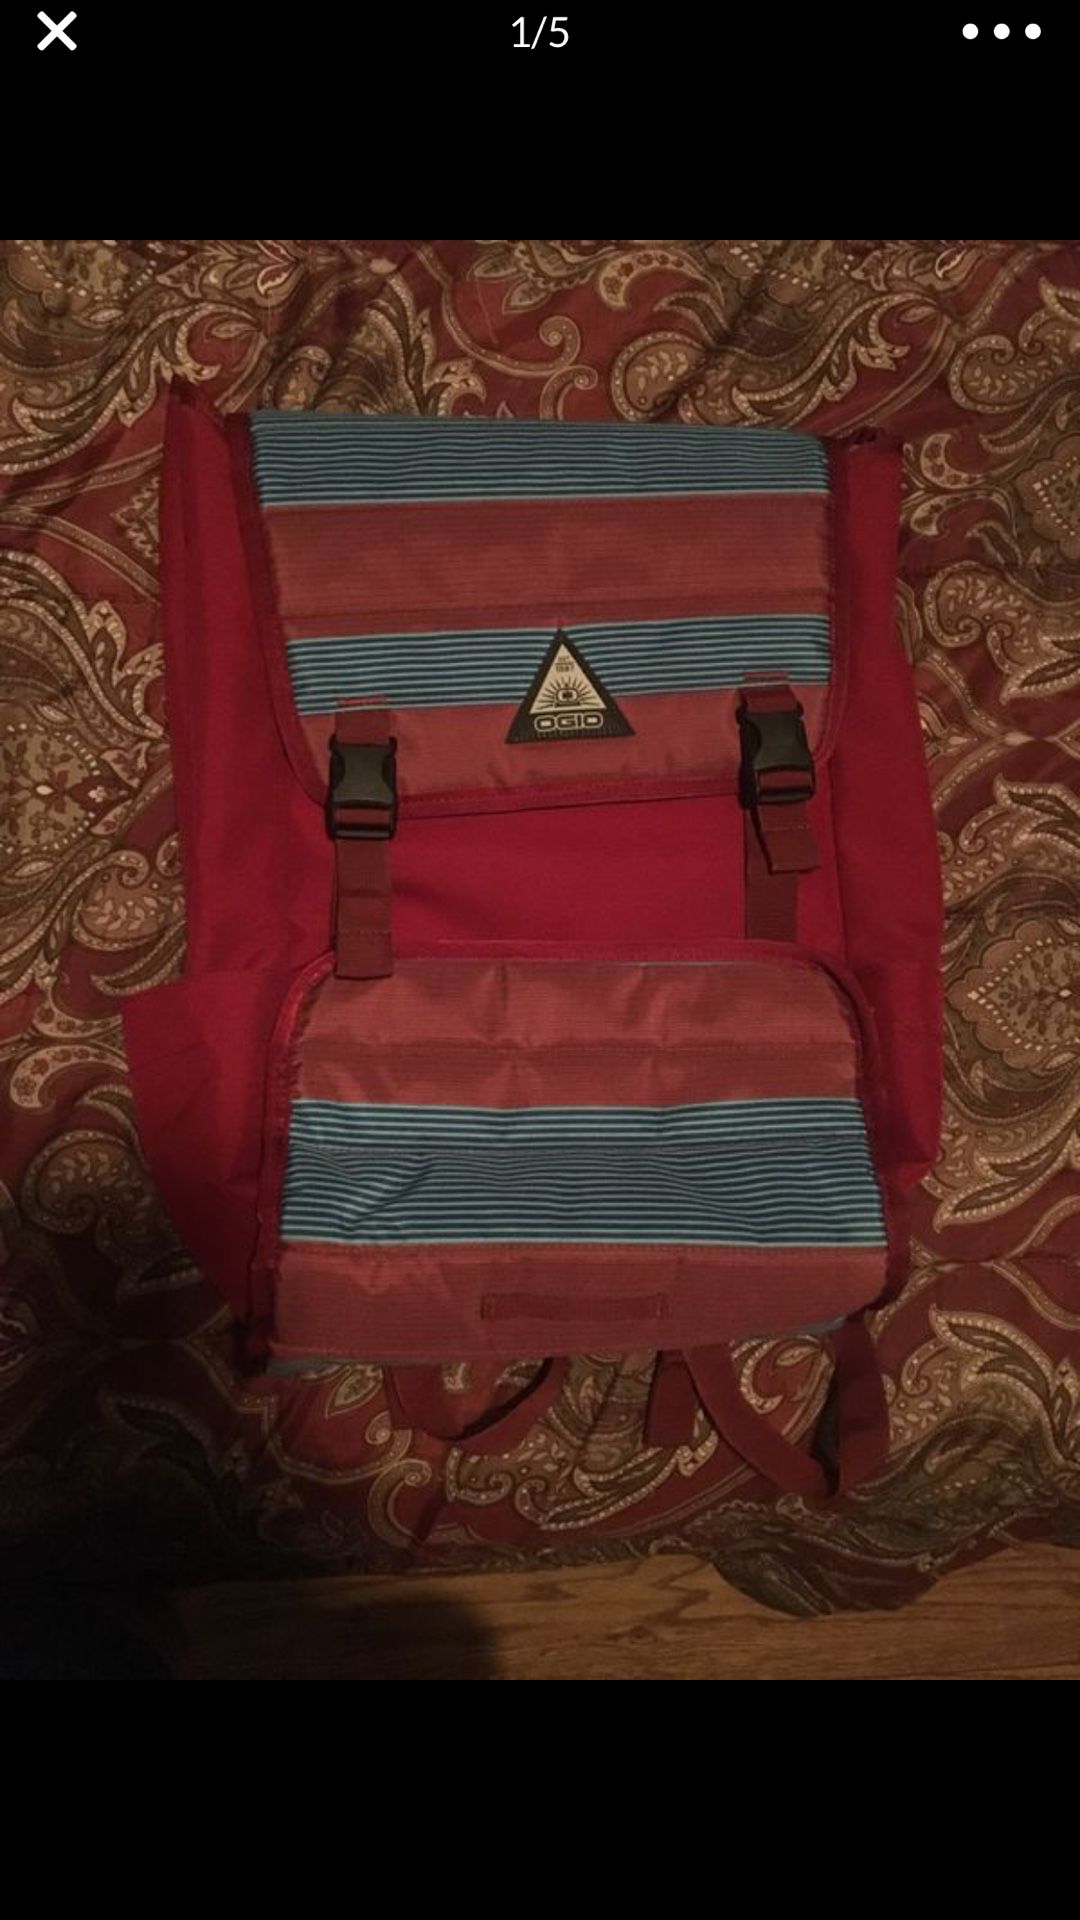 Backpack with laptop holder